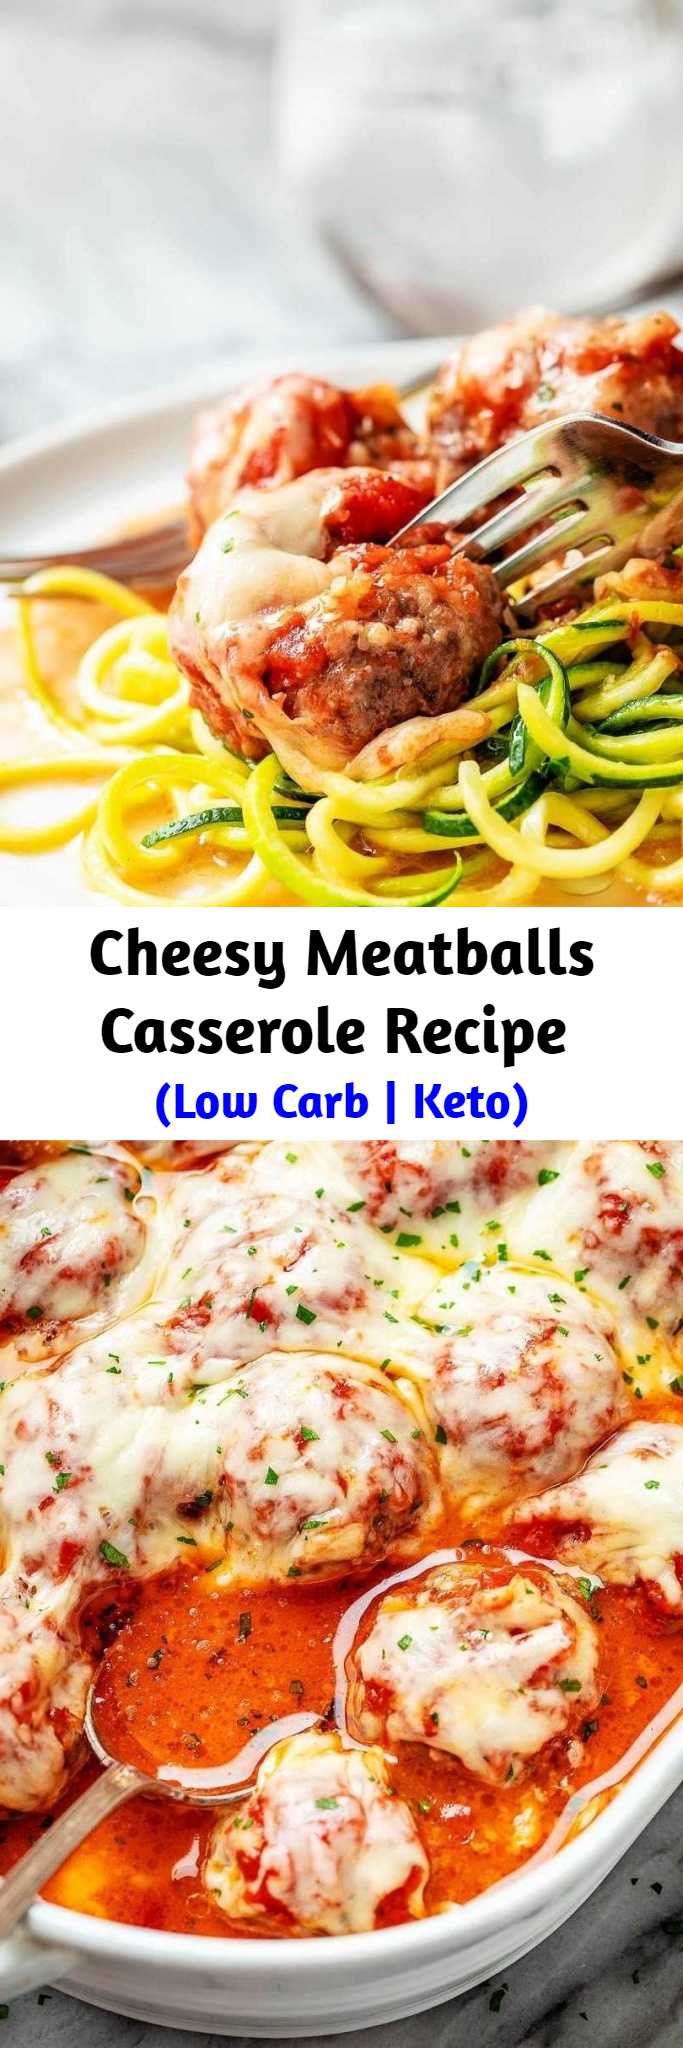 Cheesy Meatballs Casserole Recipe (Low Carb | Keto) - Looking for a great low carb dinner option? This low carb turkey meatball casserole recipe is absolutely fabulous. #lowcarb #meatballs #recipe